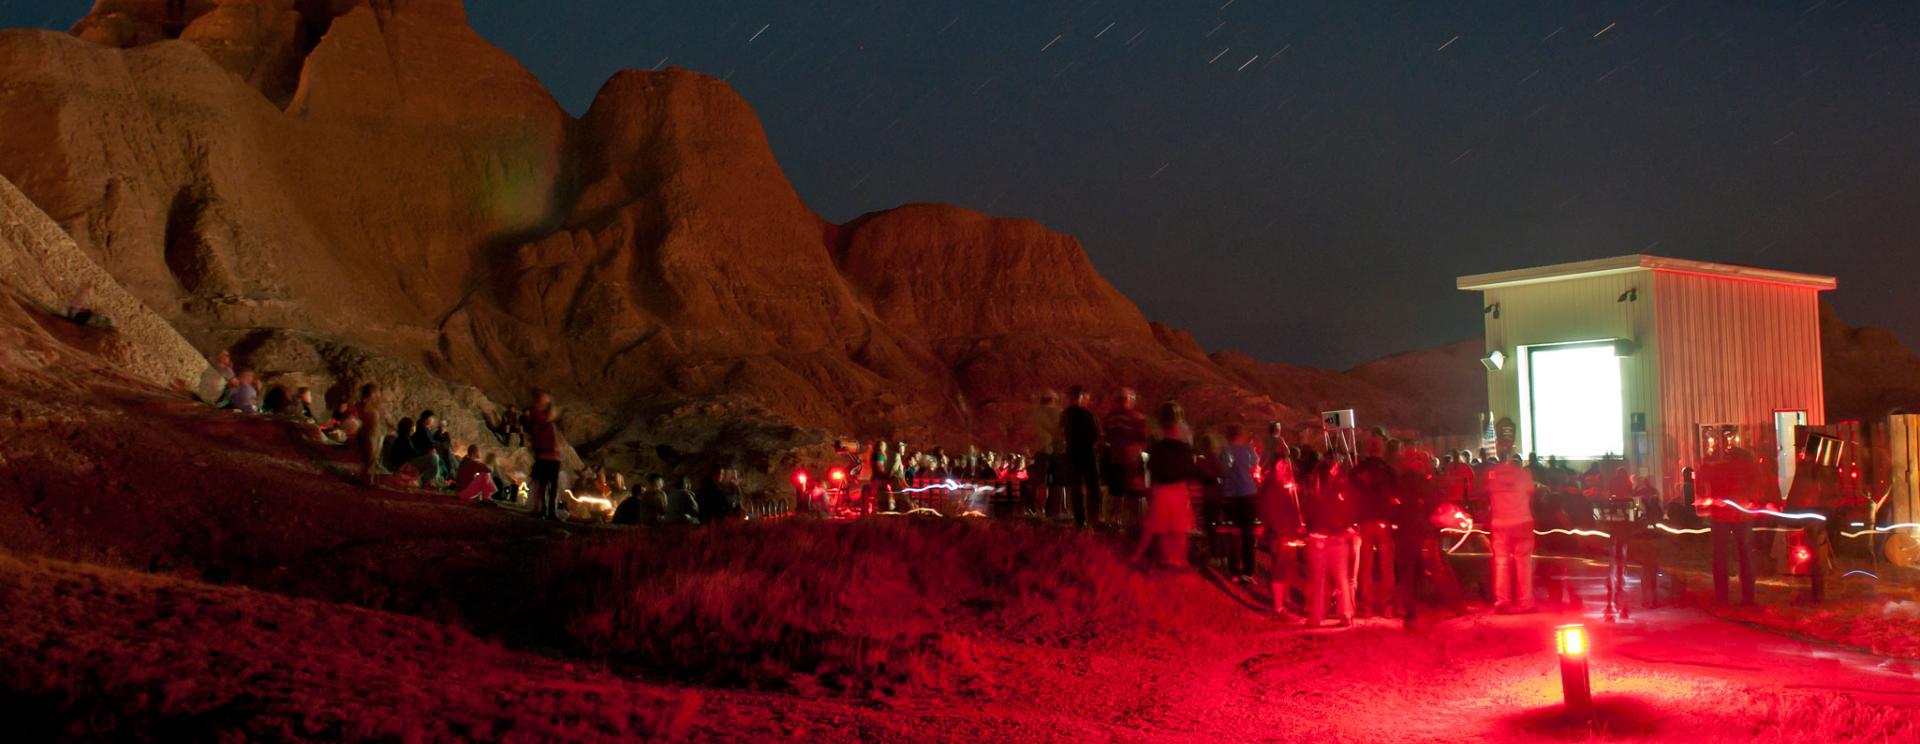 Astronomy and Night Sky Viewing in Badlands National Park